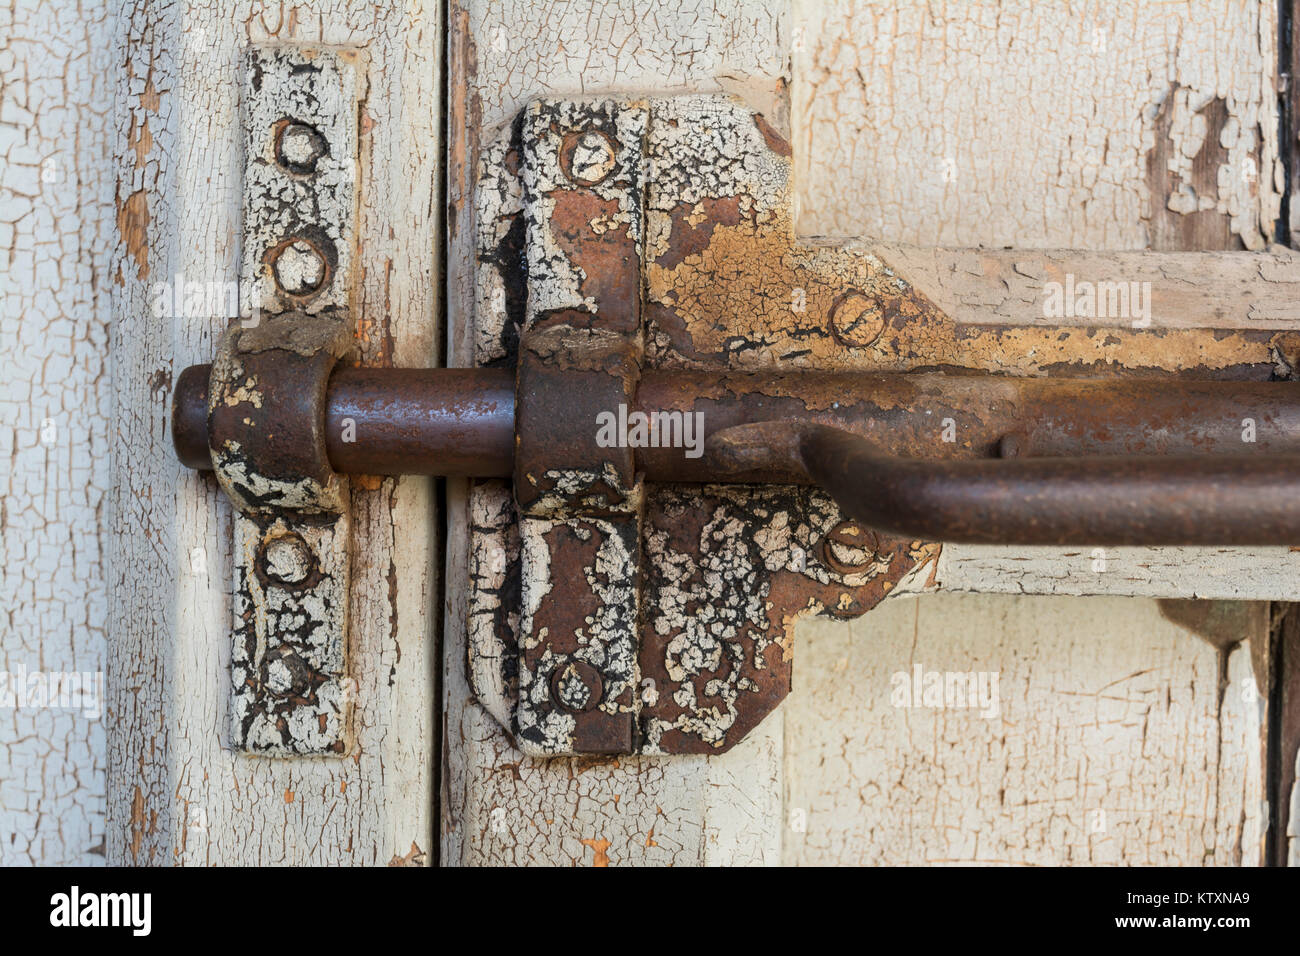 Very old, deteriorating gate latch bolt in a locked position, complete with rusting parts, and peeling white paint on the wooden door. Closely cropped a Stock Photo